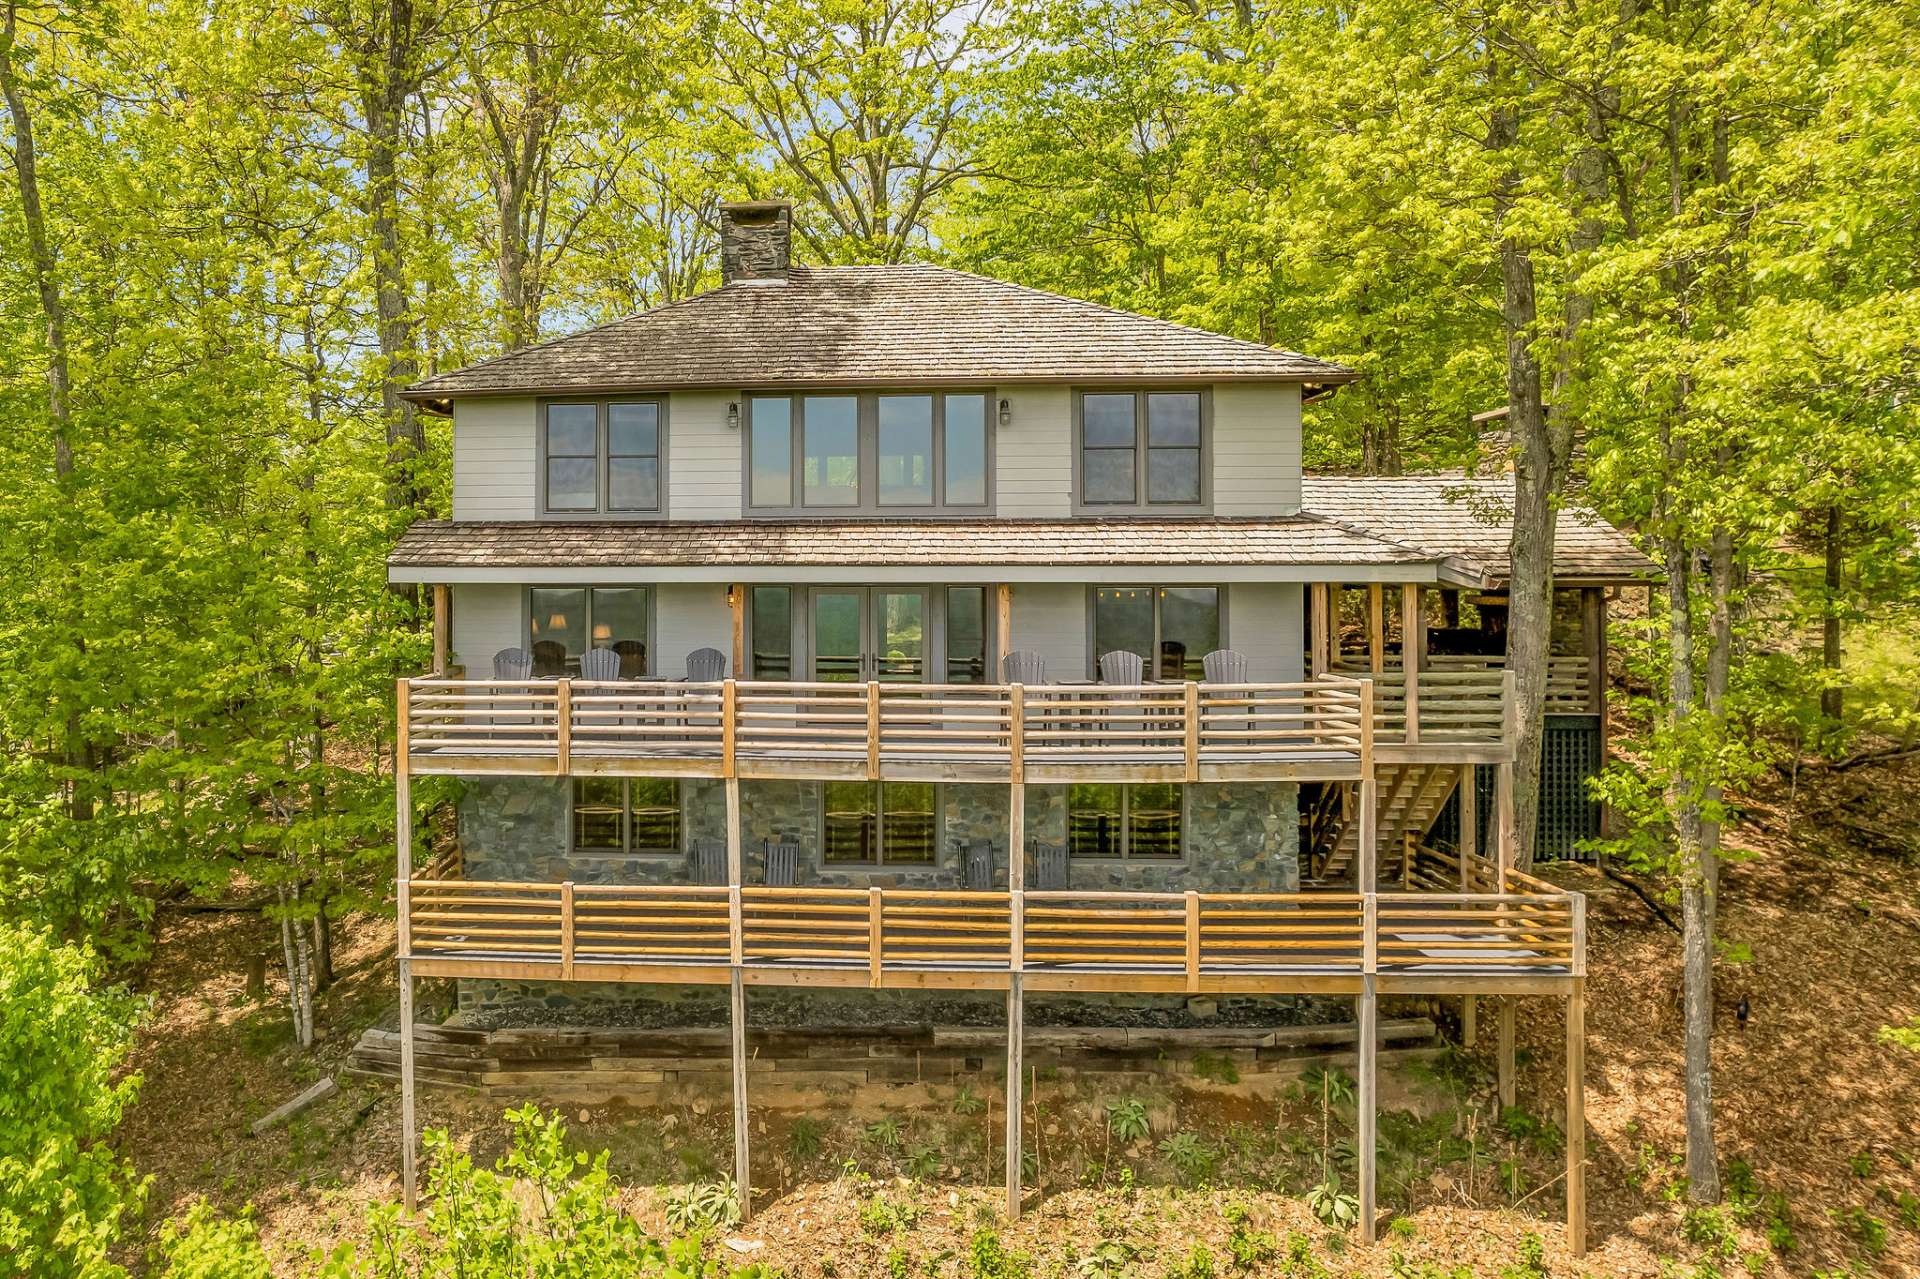 Enjoy the great outdoors and the fresh mountain air from either of the full length decks on the back of the cabin, with both decks providing access to the covered deck on the side which features an outdoor fireplace.